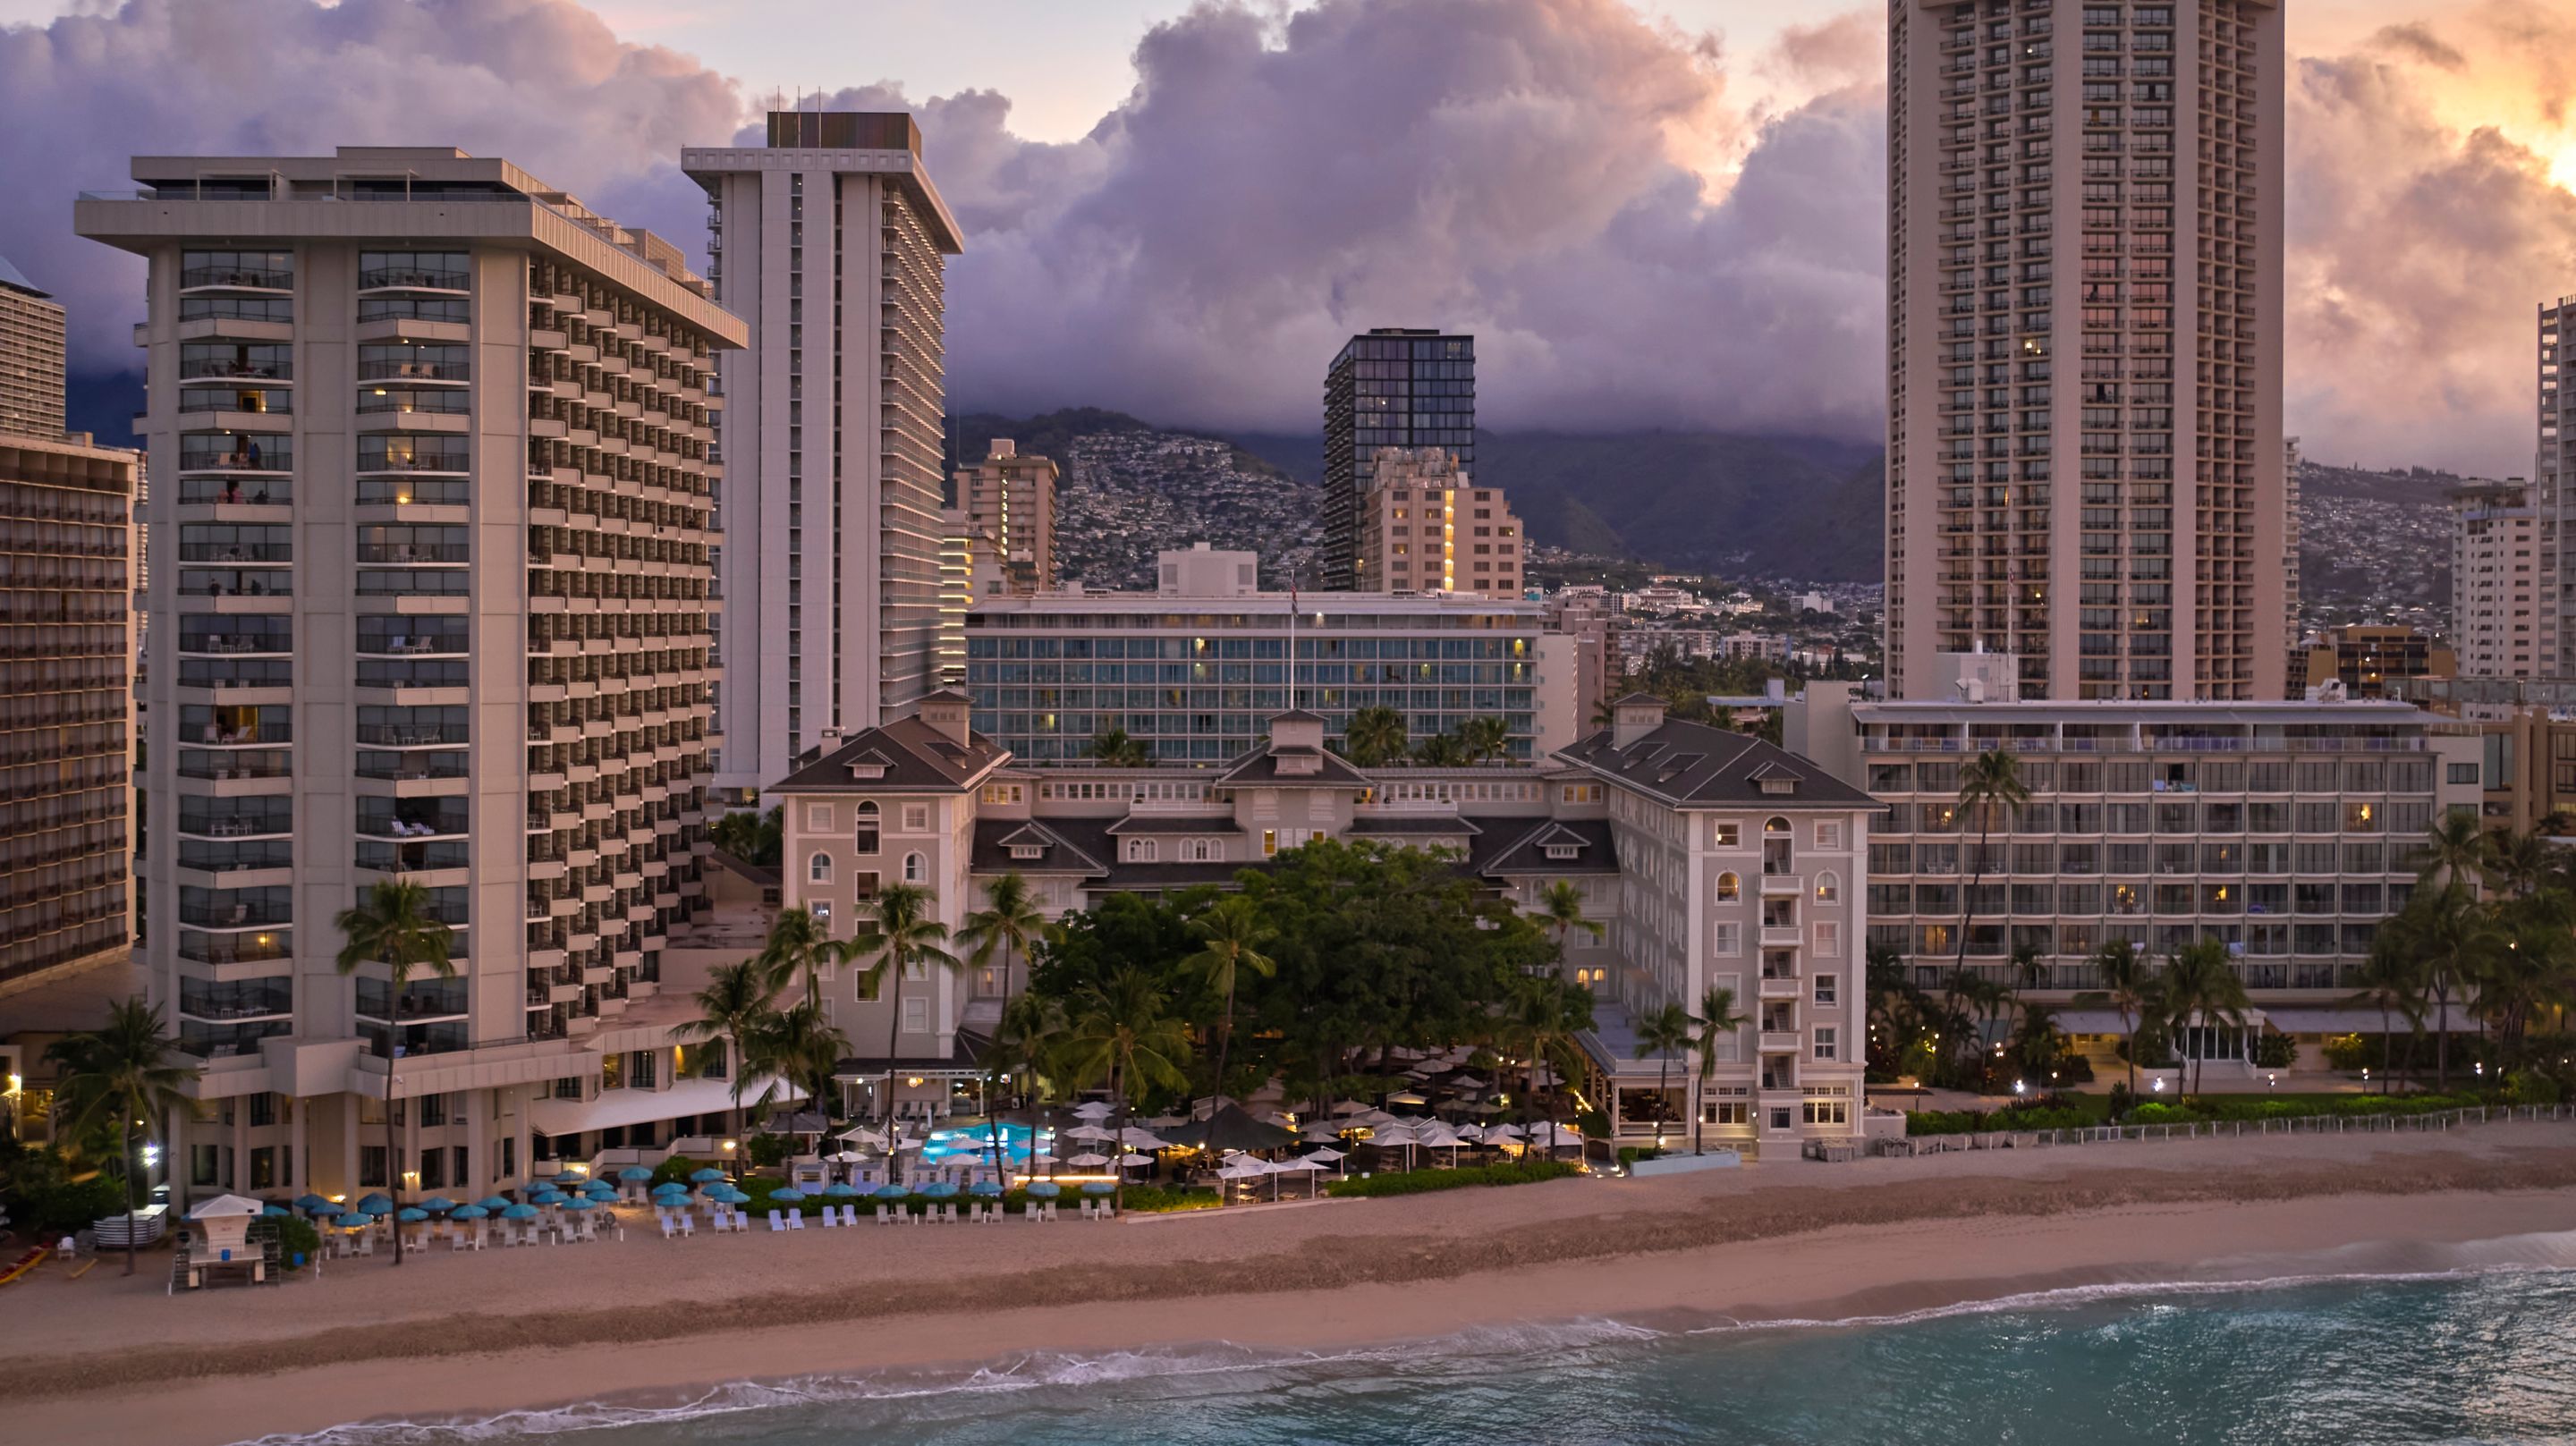 Costco Members [Oahu Hawaii] Moana Surfrider, A Westin Resort & Spa 4-Night + $100 Resort Credit, Digital Shop Card, Taxes & Fees & More From $819 PP - Book by April 4, 2024